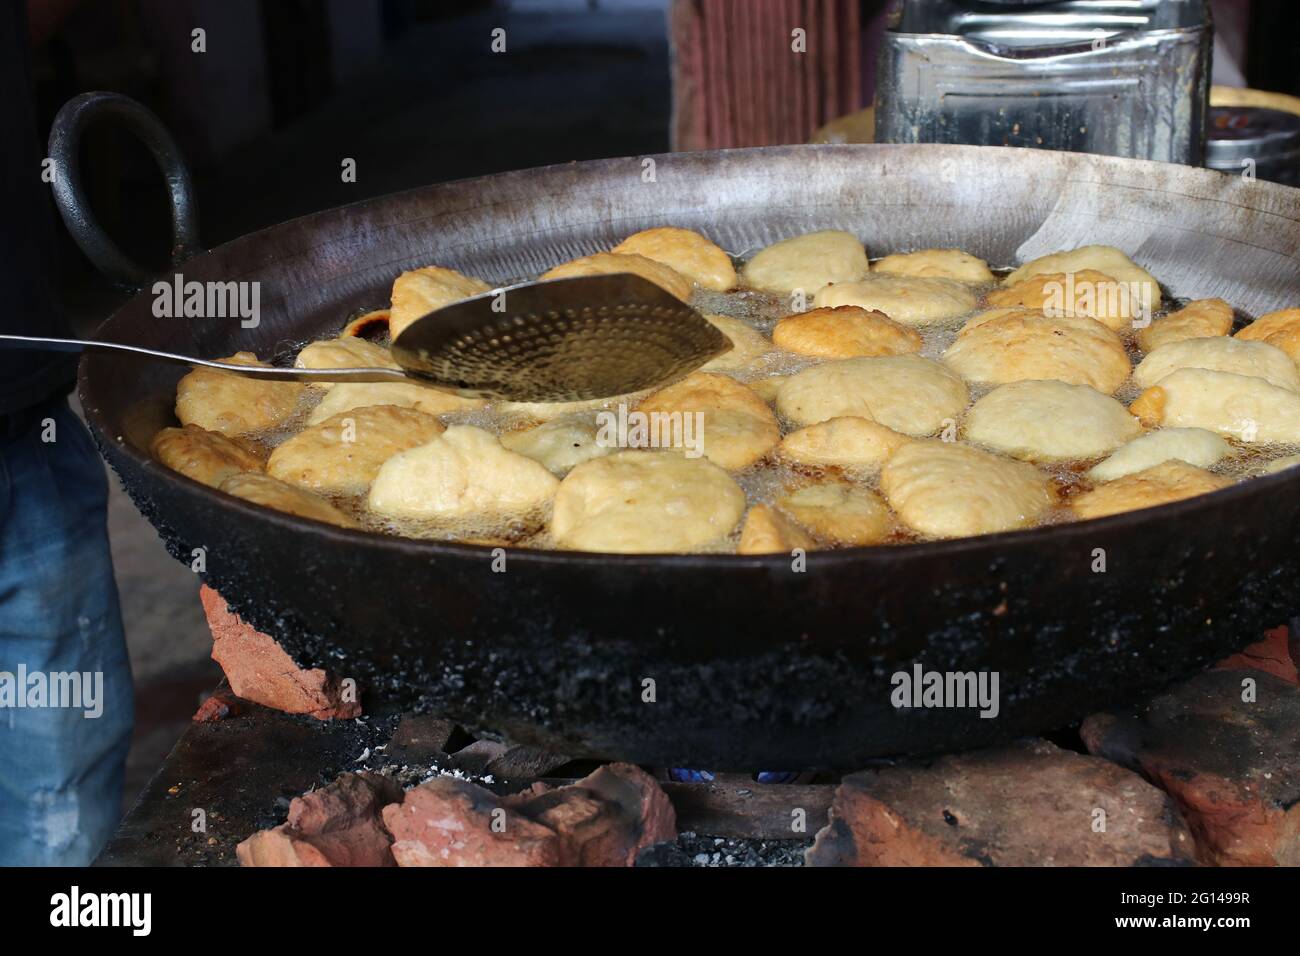 Traditional Indian street food. Sweet food, food with spice Stock Photo